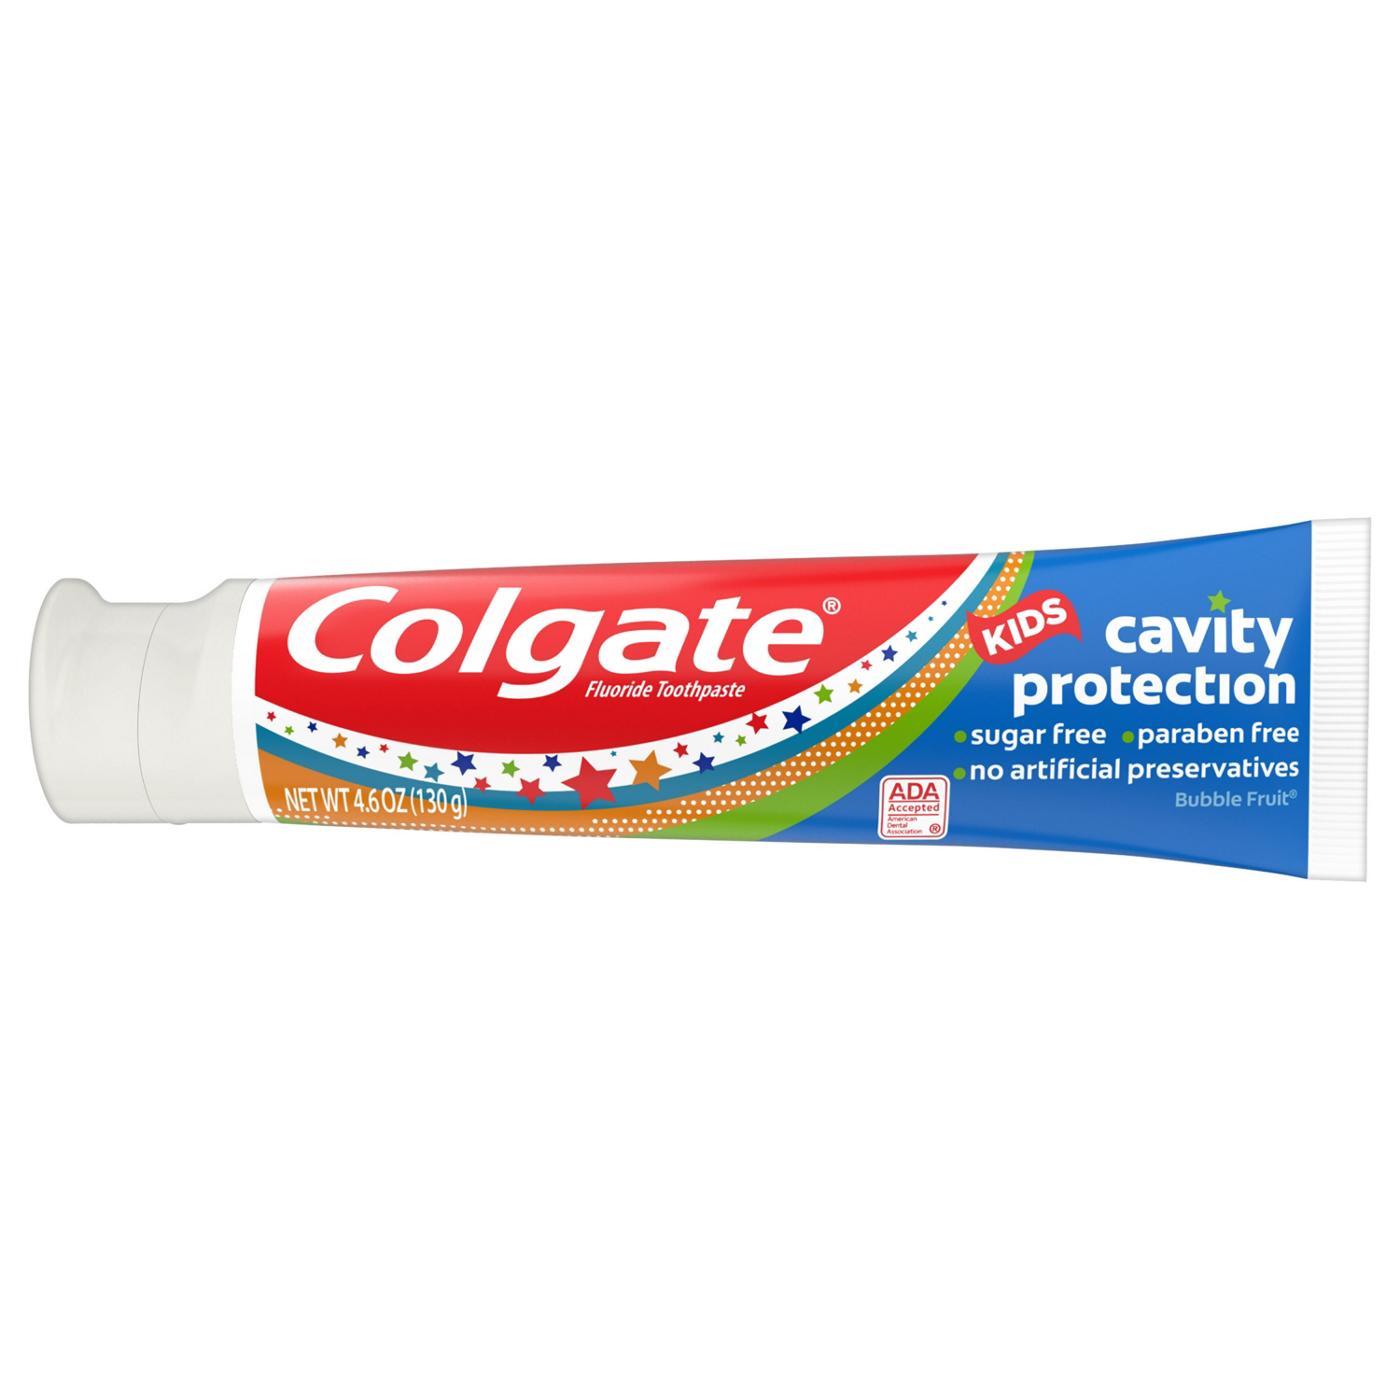 Colgate Kids Cavity Protection Toothpaste - Bubble Fruit, 2 Pk; image 4 of 8